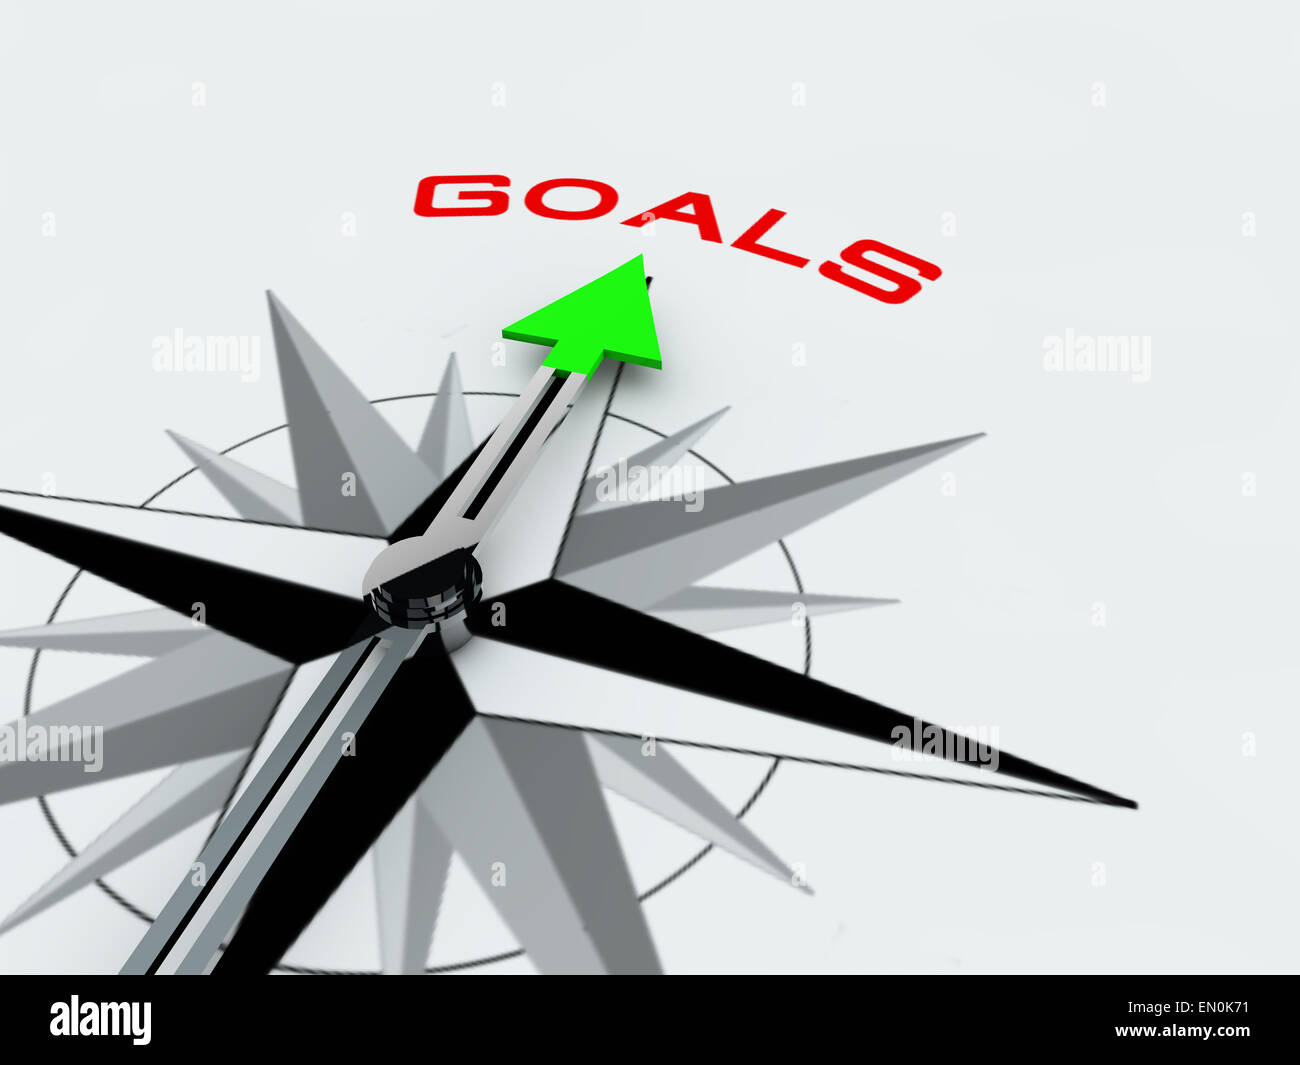 Goals Compass over white background Stock Photo